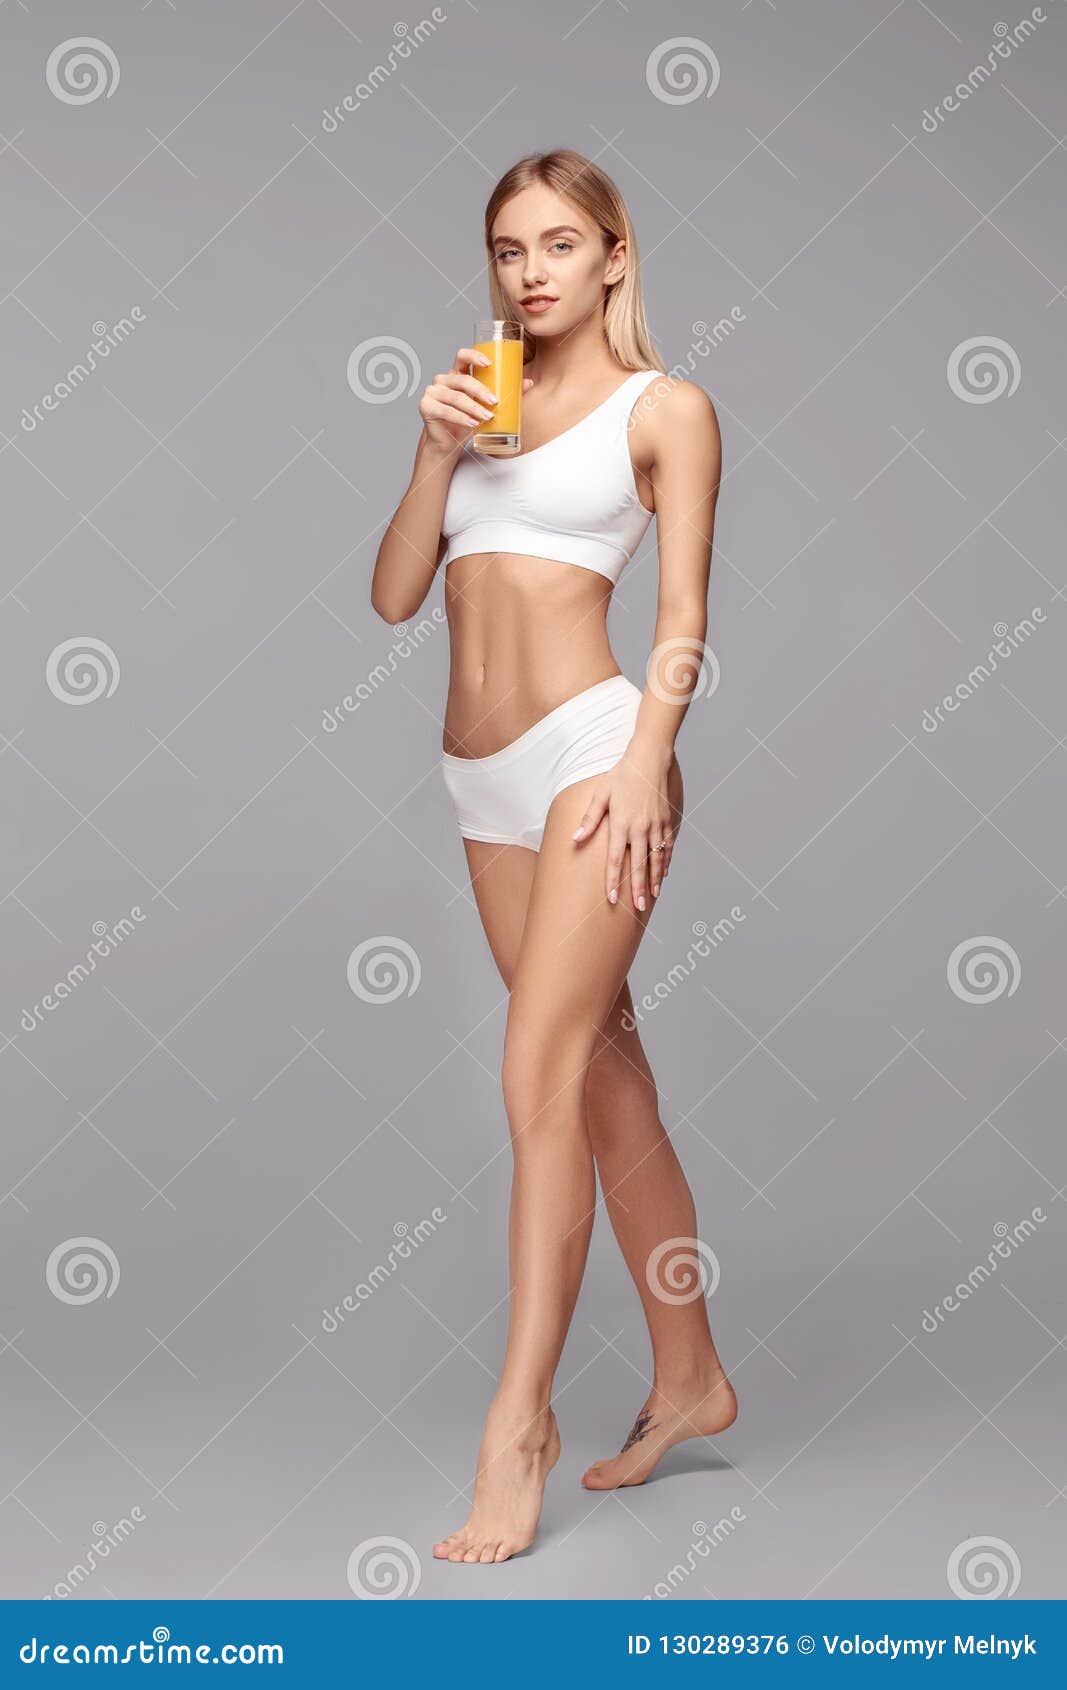 Perfect Slim Toned Young Body Of The Girl Or Fit Woman At Studio